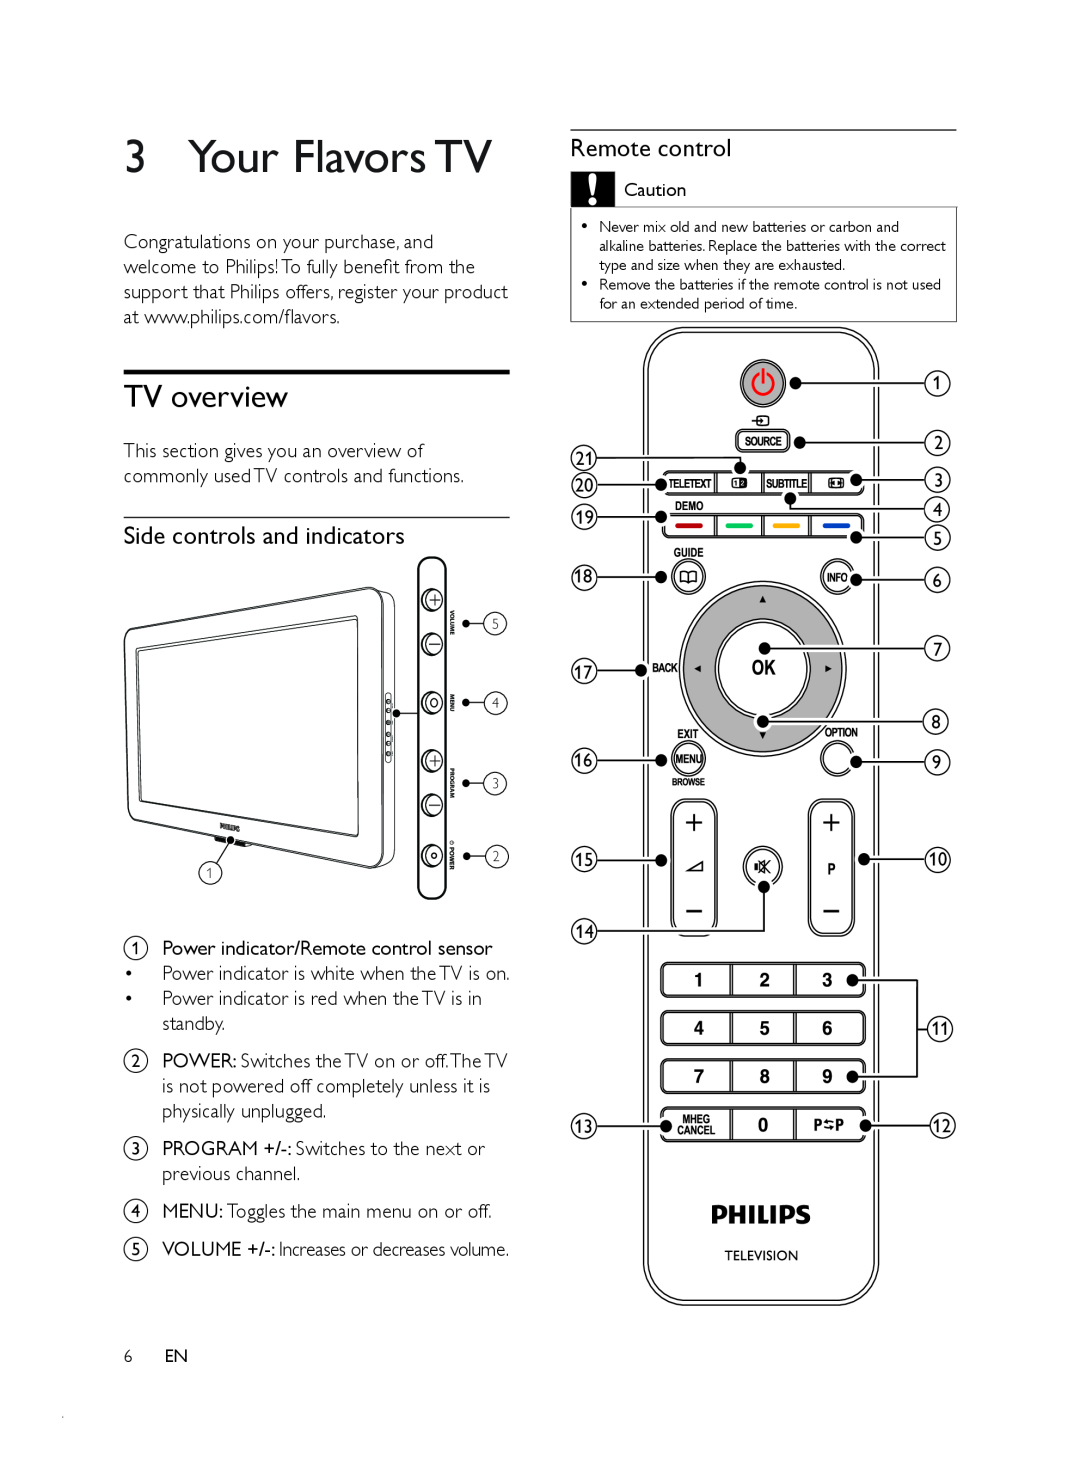 Philips 22PFL6403D/12, 32PFL6403D/12 user manual Your Flavors TV, TV overview, Side controls and indicators, Remote control 